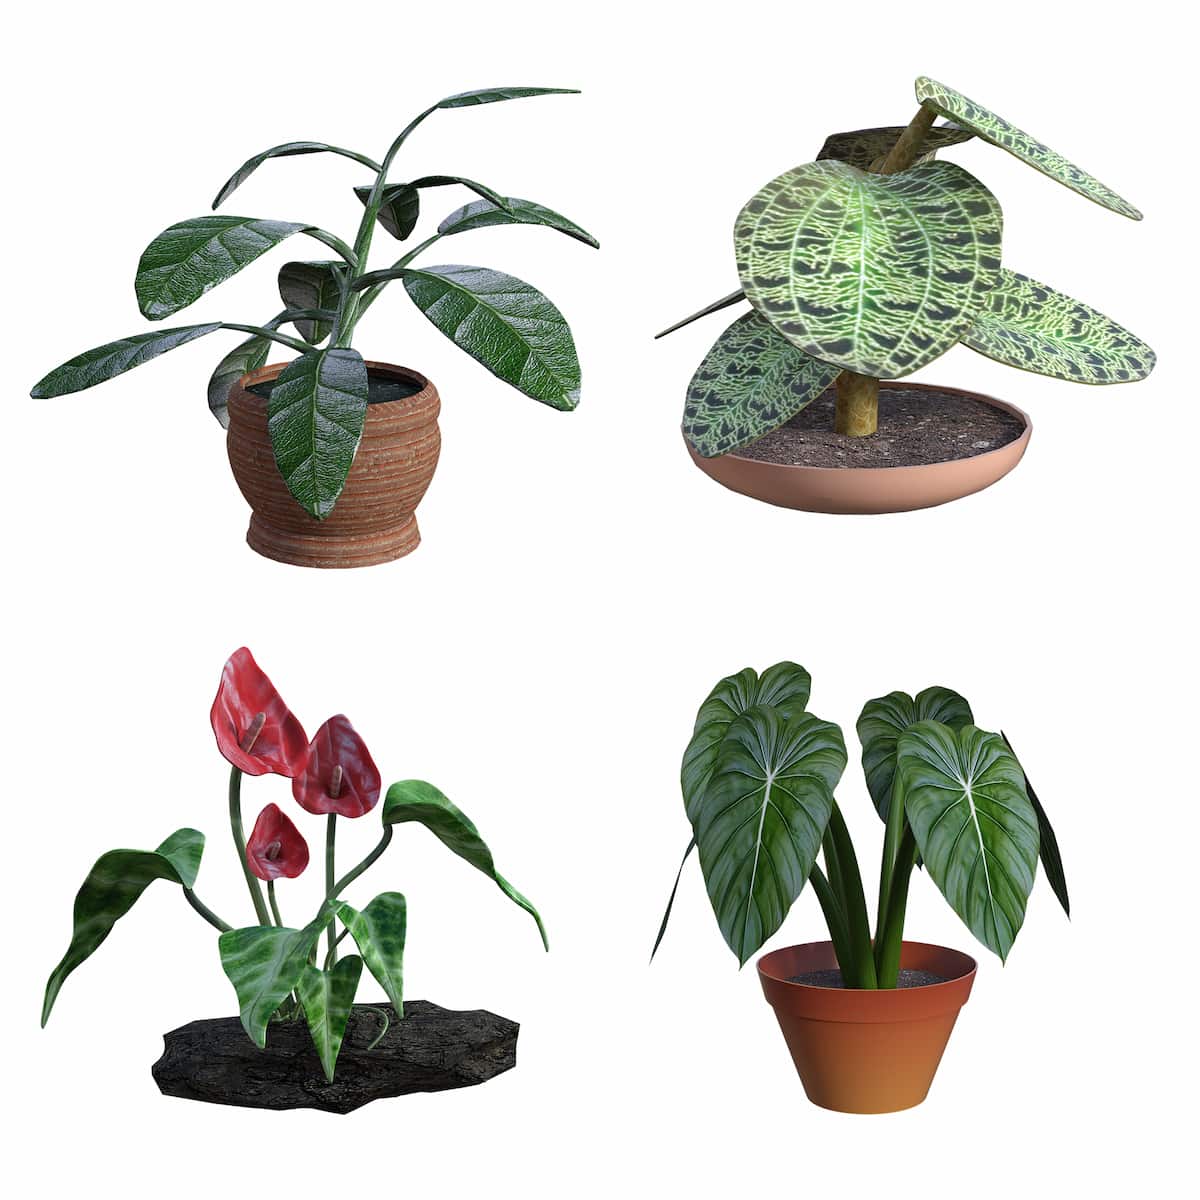 How to Choose the Suitable Container for Your Houseplants